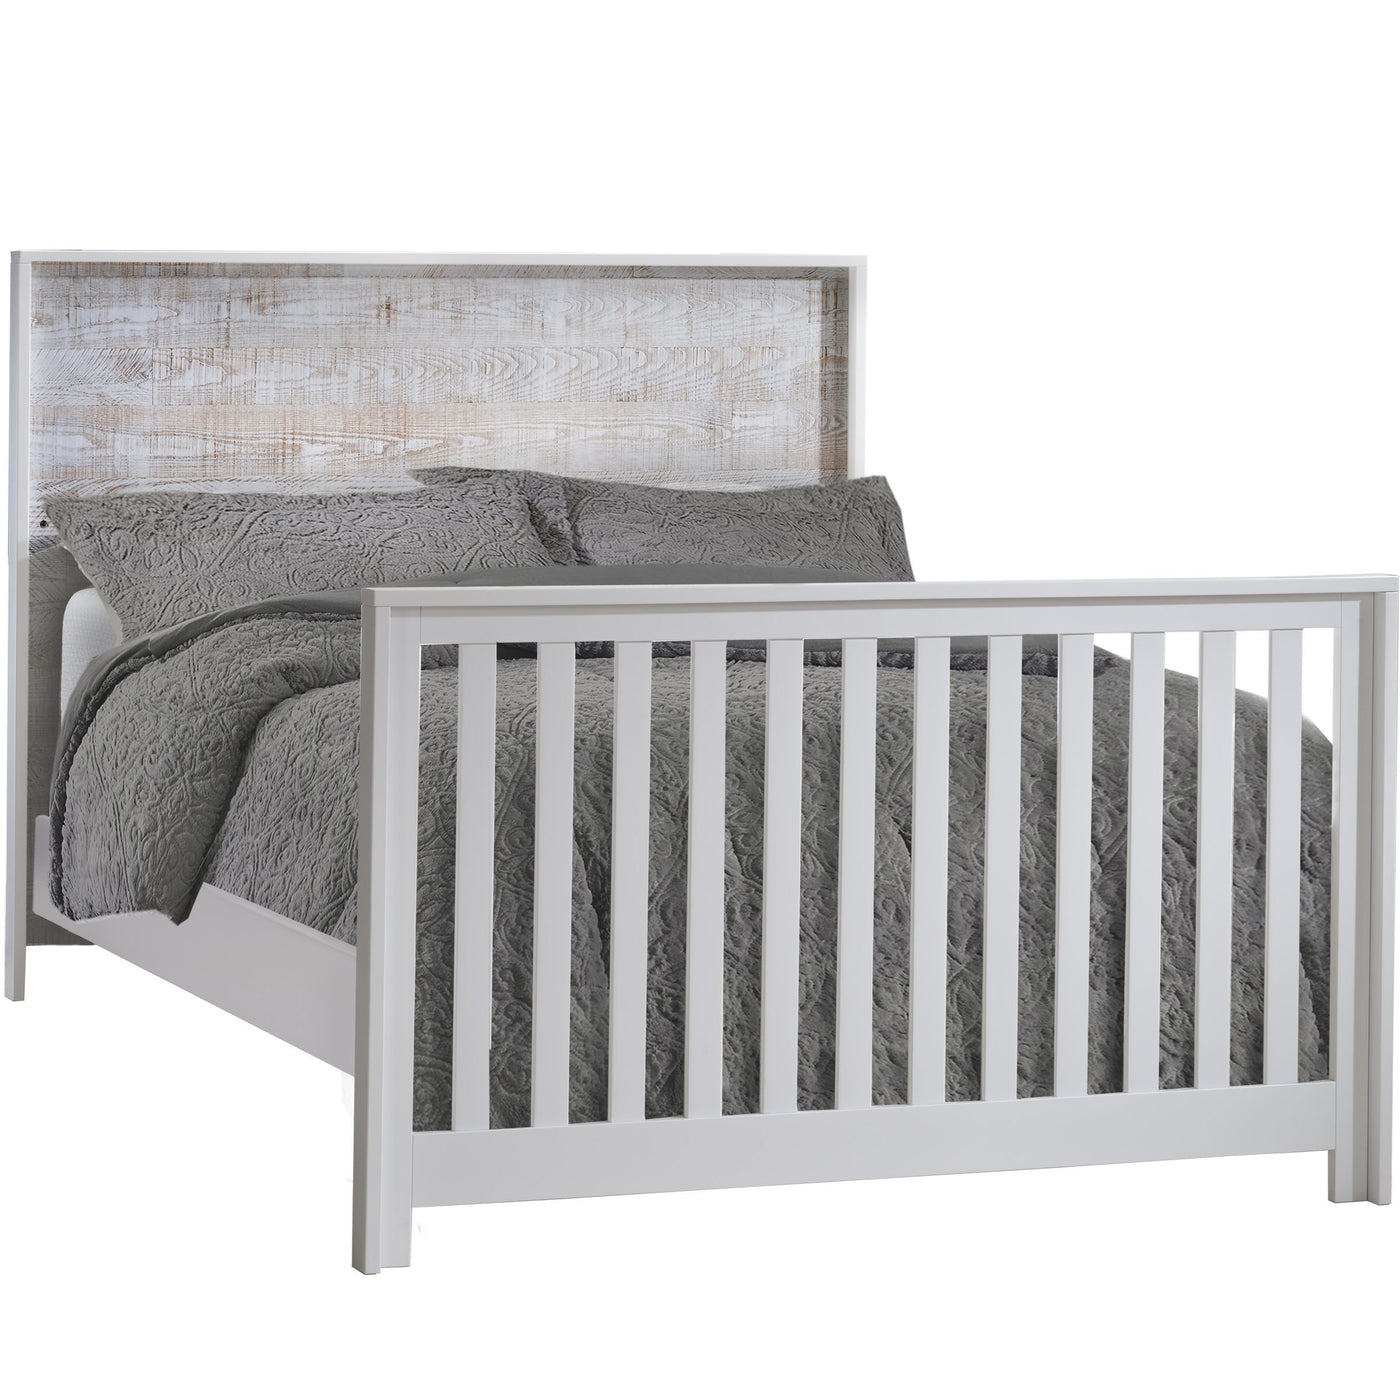 Nest Double Bed Conversion Rails in White